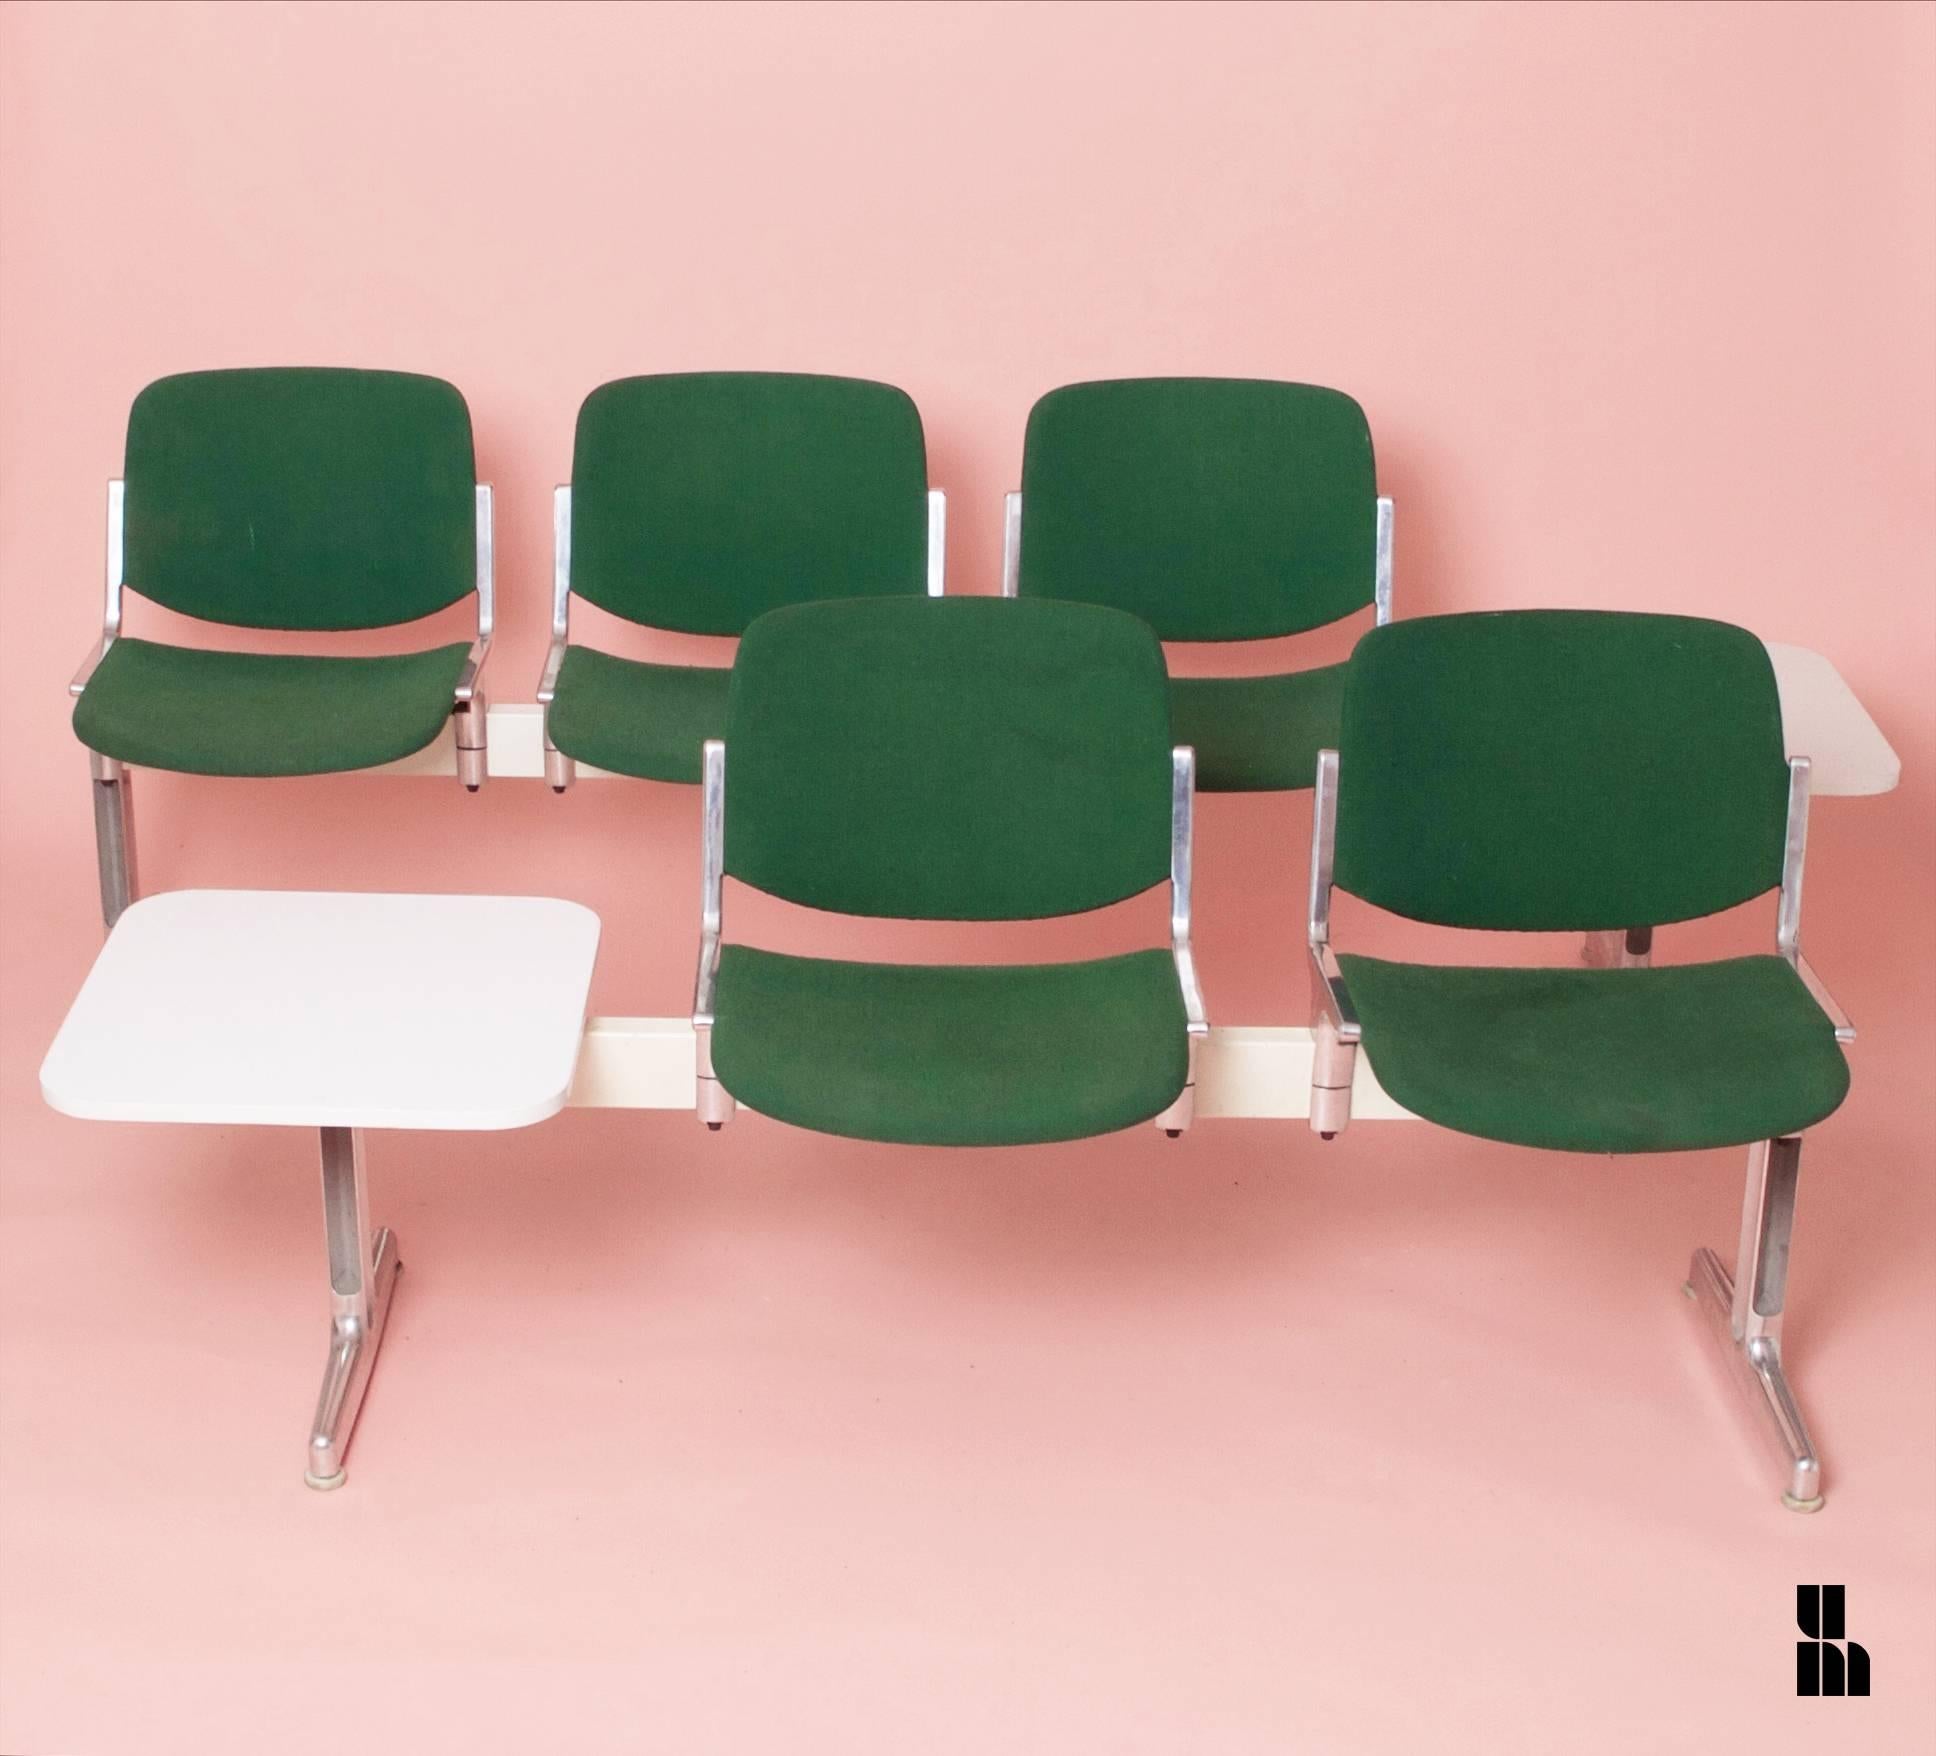 Nice two and three-seat benches with side end tables designed by Giancarlo Piretti for Castelli Anonima in the 1970s.
Seats are garnished with green fabric and attached to a steel frame and polished aluminum.
End tables measures: 50 cm x 52 cm